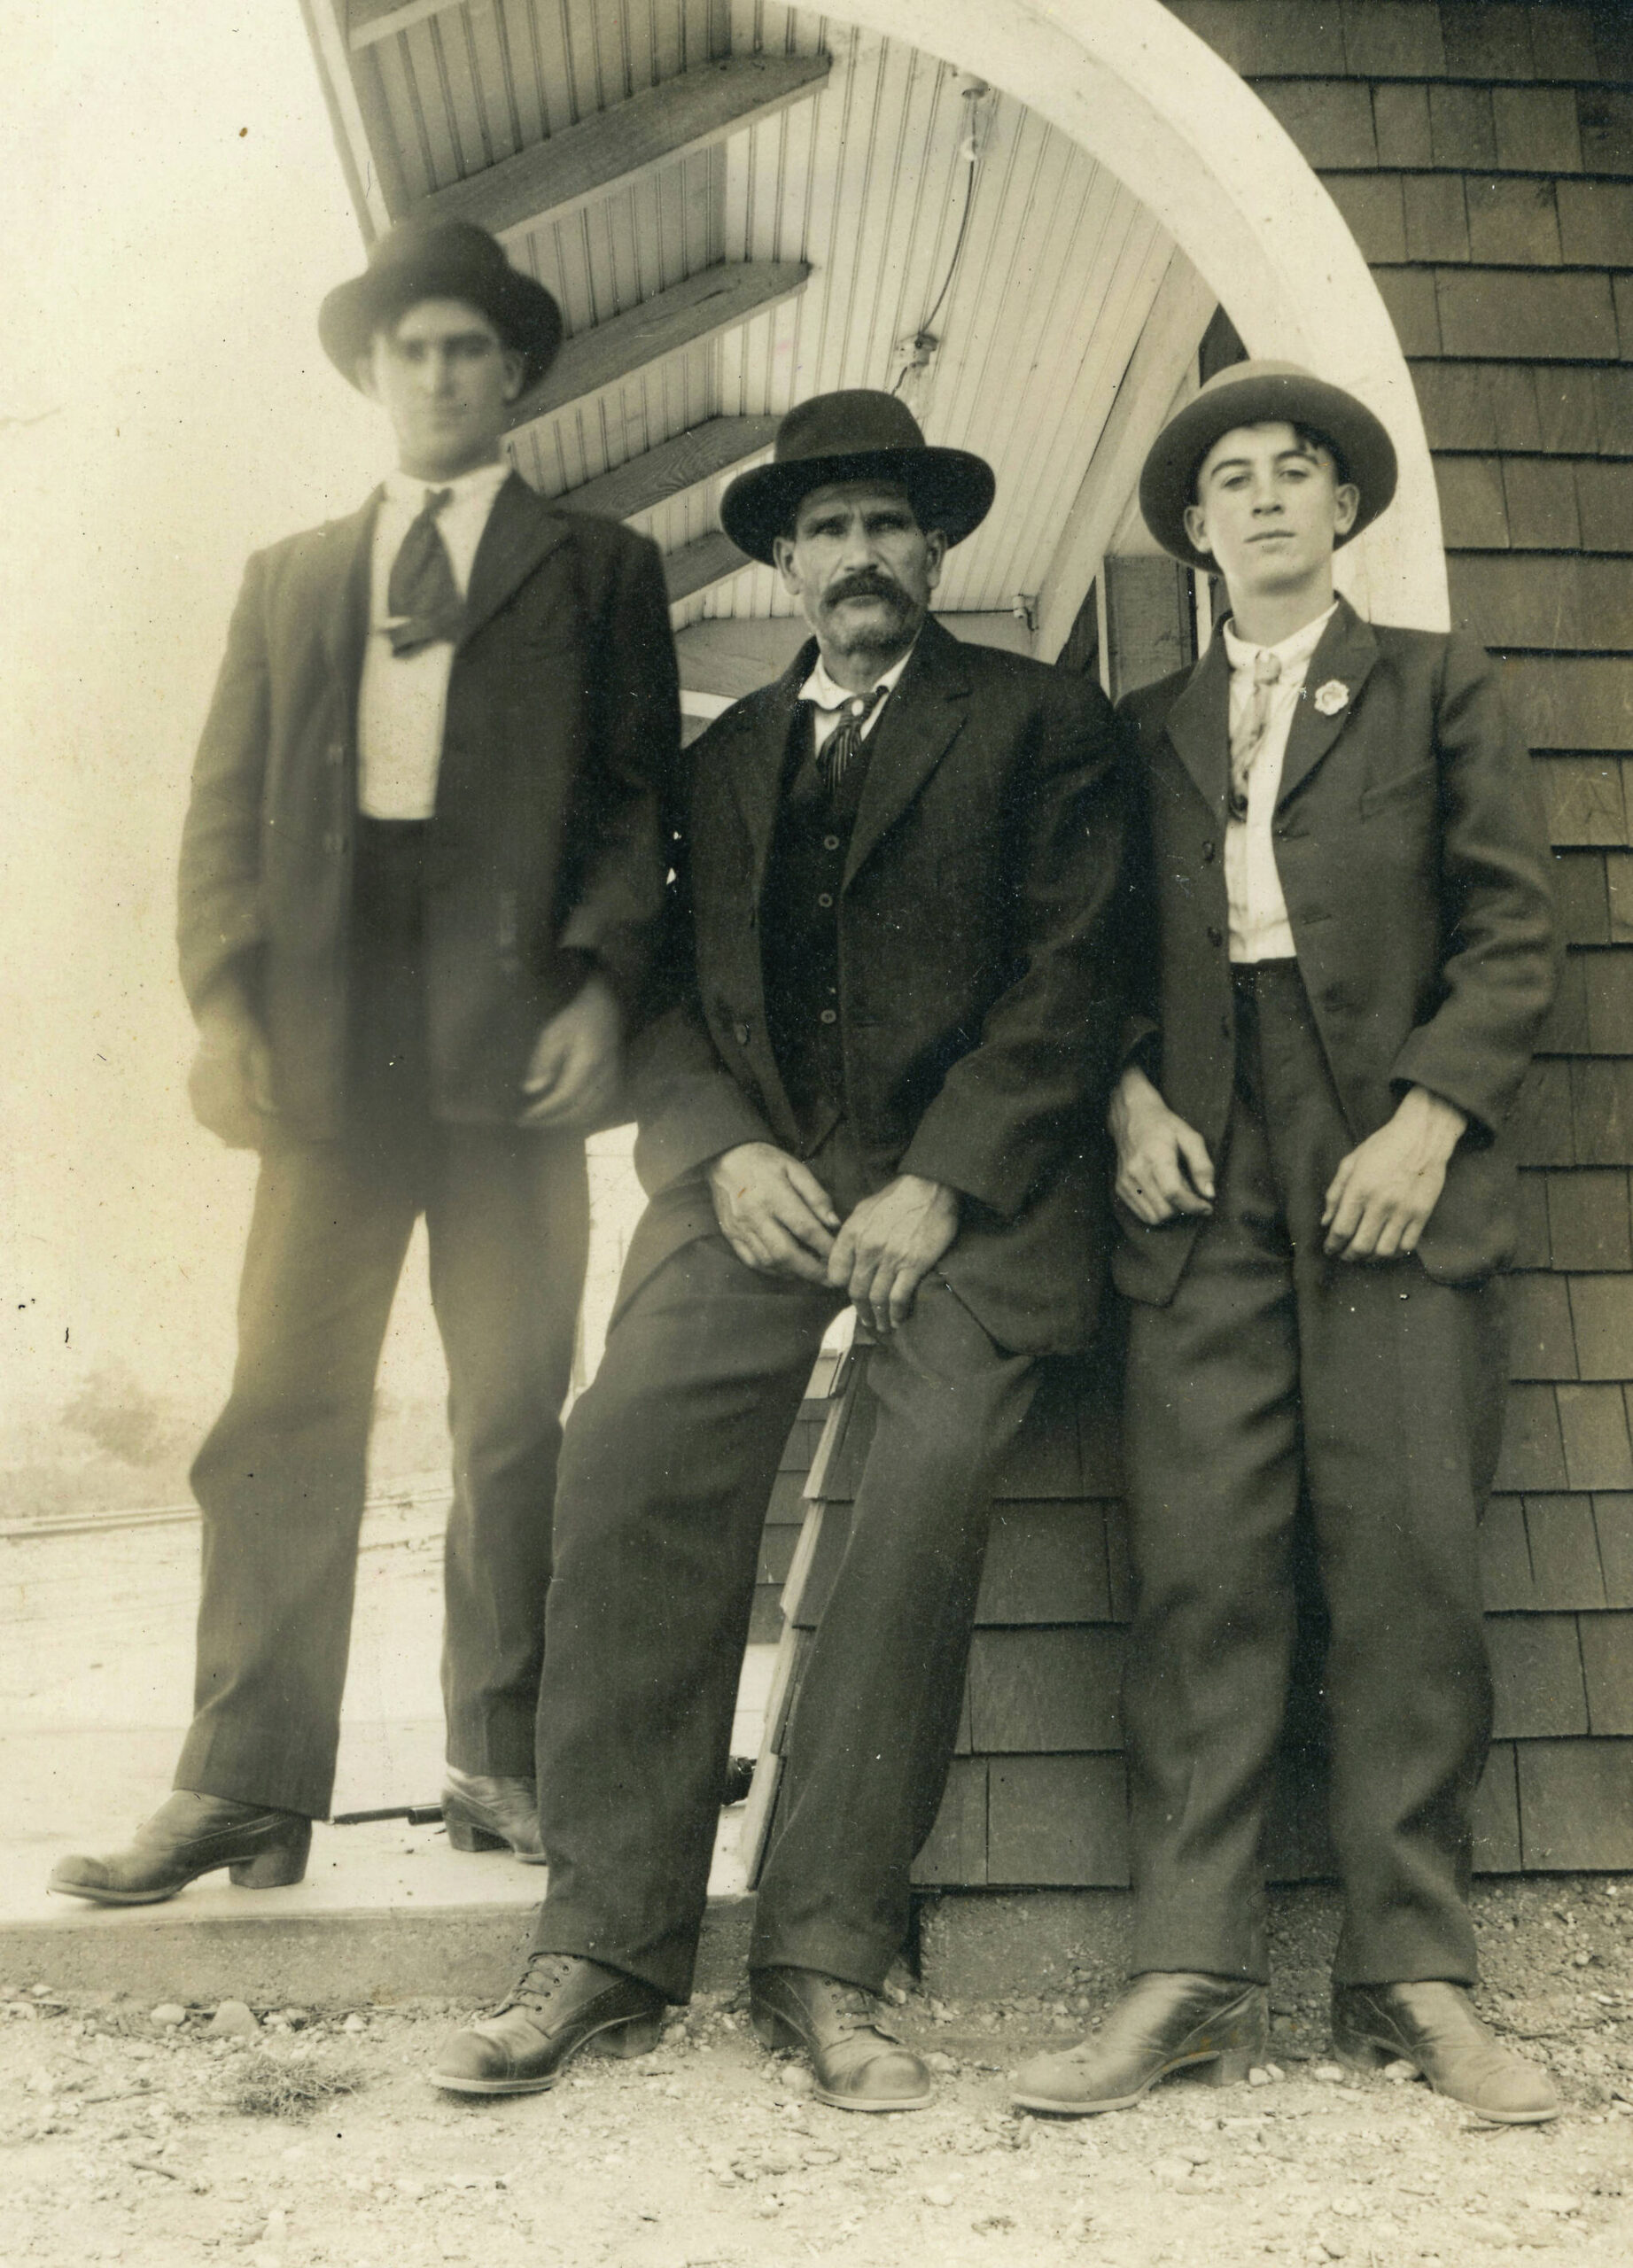 Lawrence Keeler (left) poses with his father and younger brother (Dewey) in about 1920. Photo courtesy of the Keeler Family Collection.